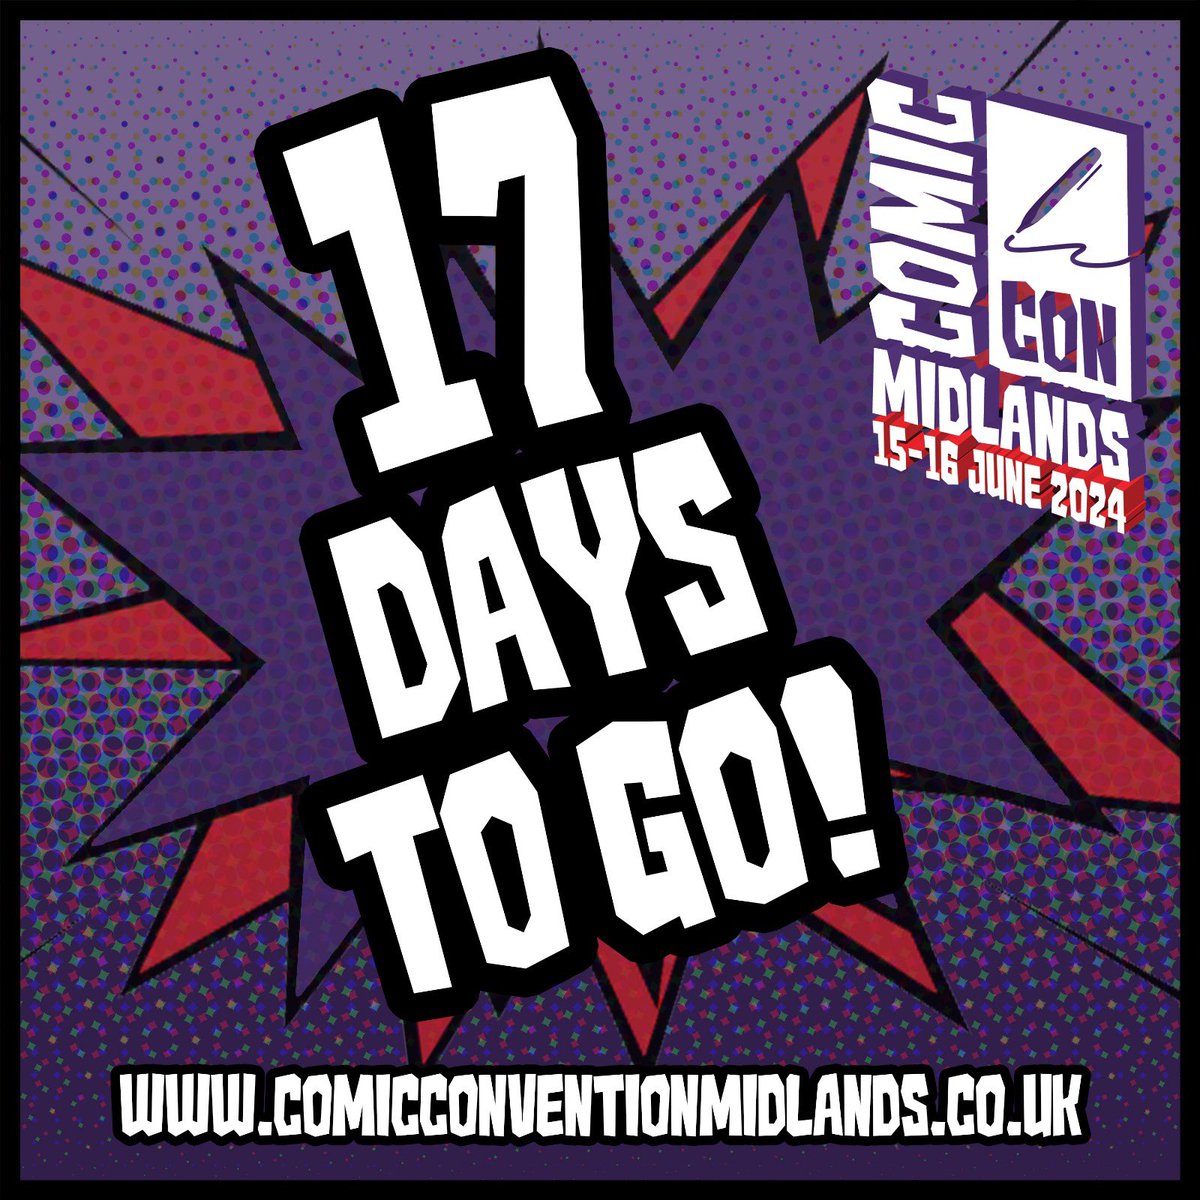 It’s just 17 days to go till our Midlands convention! Tickets: comicconventionmidlands.co.uk